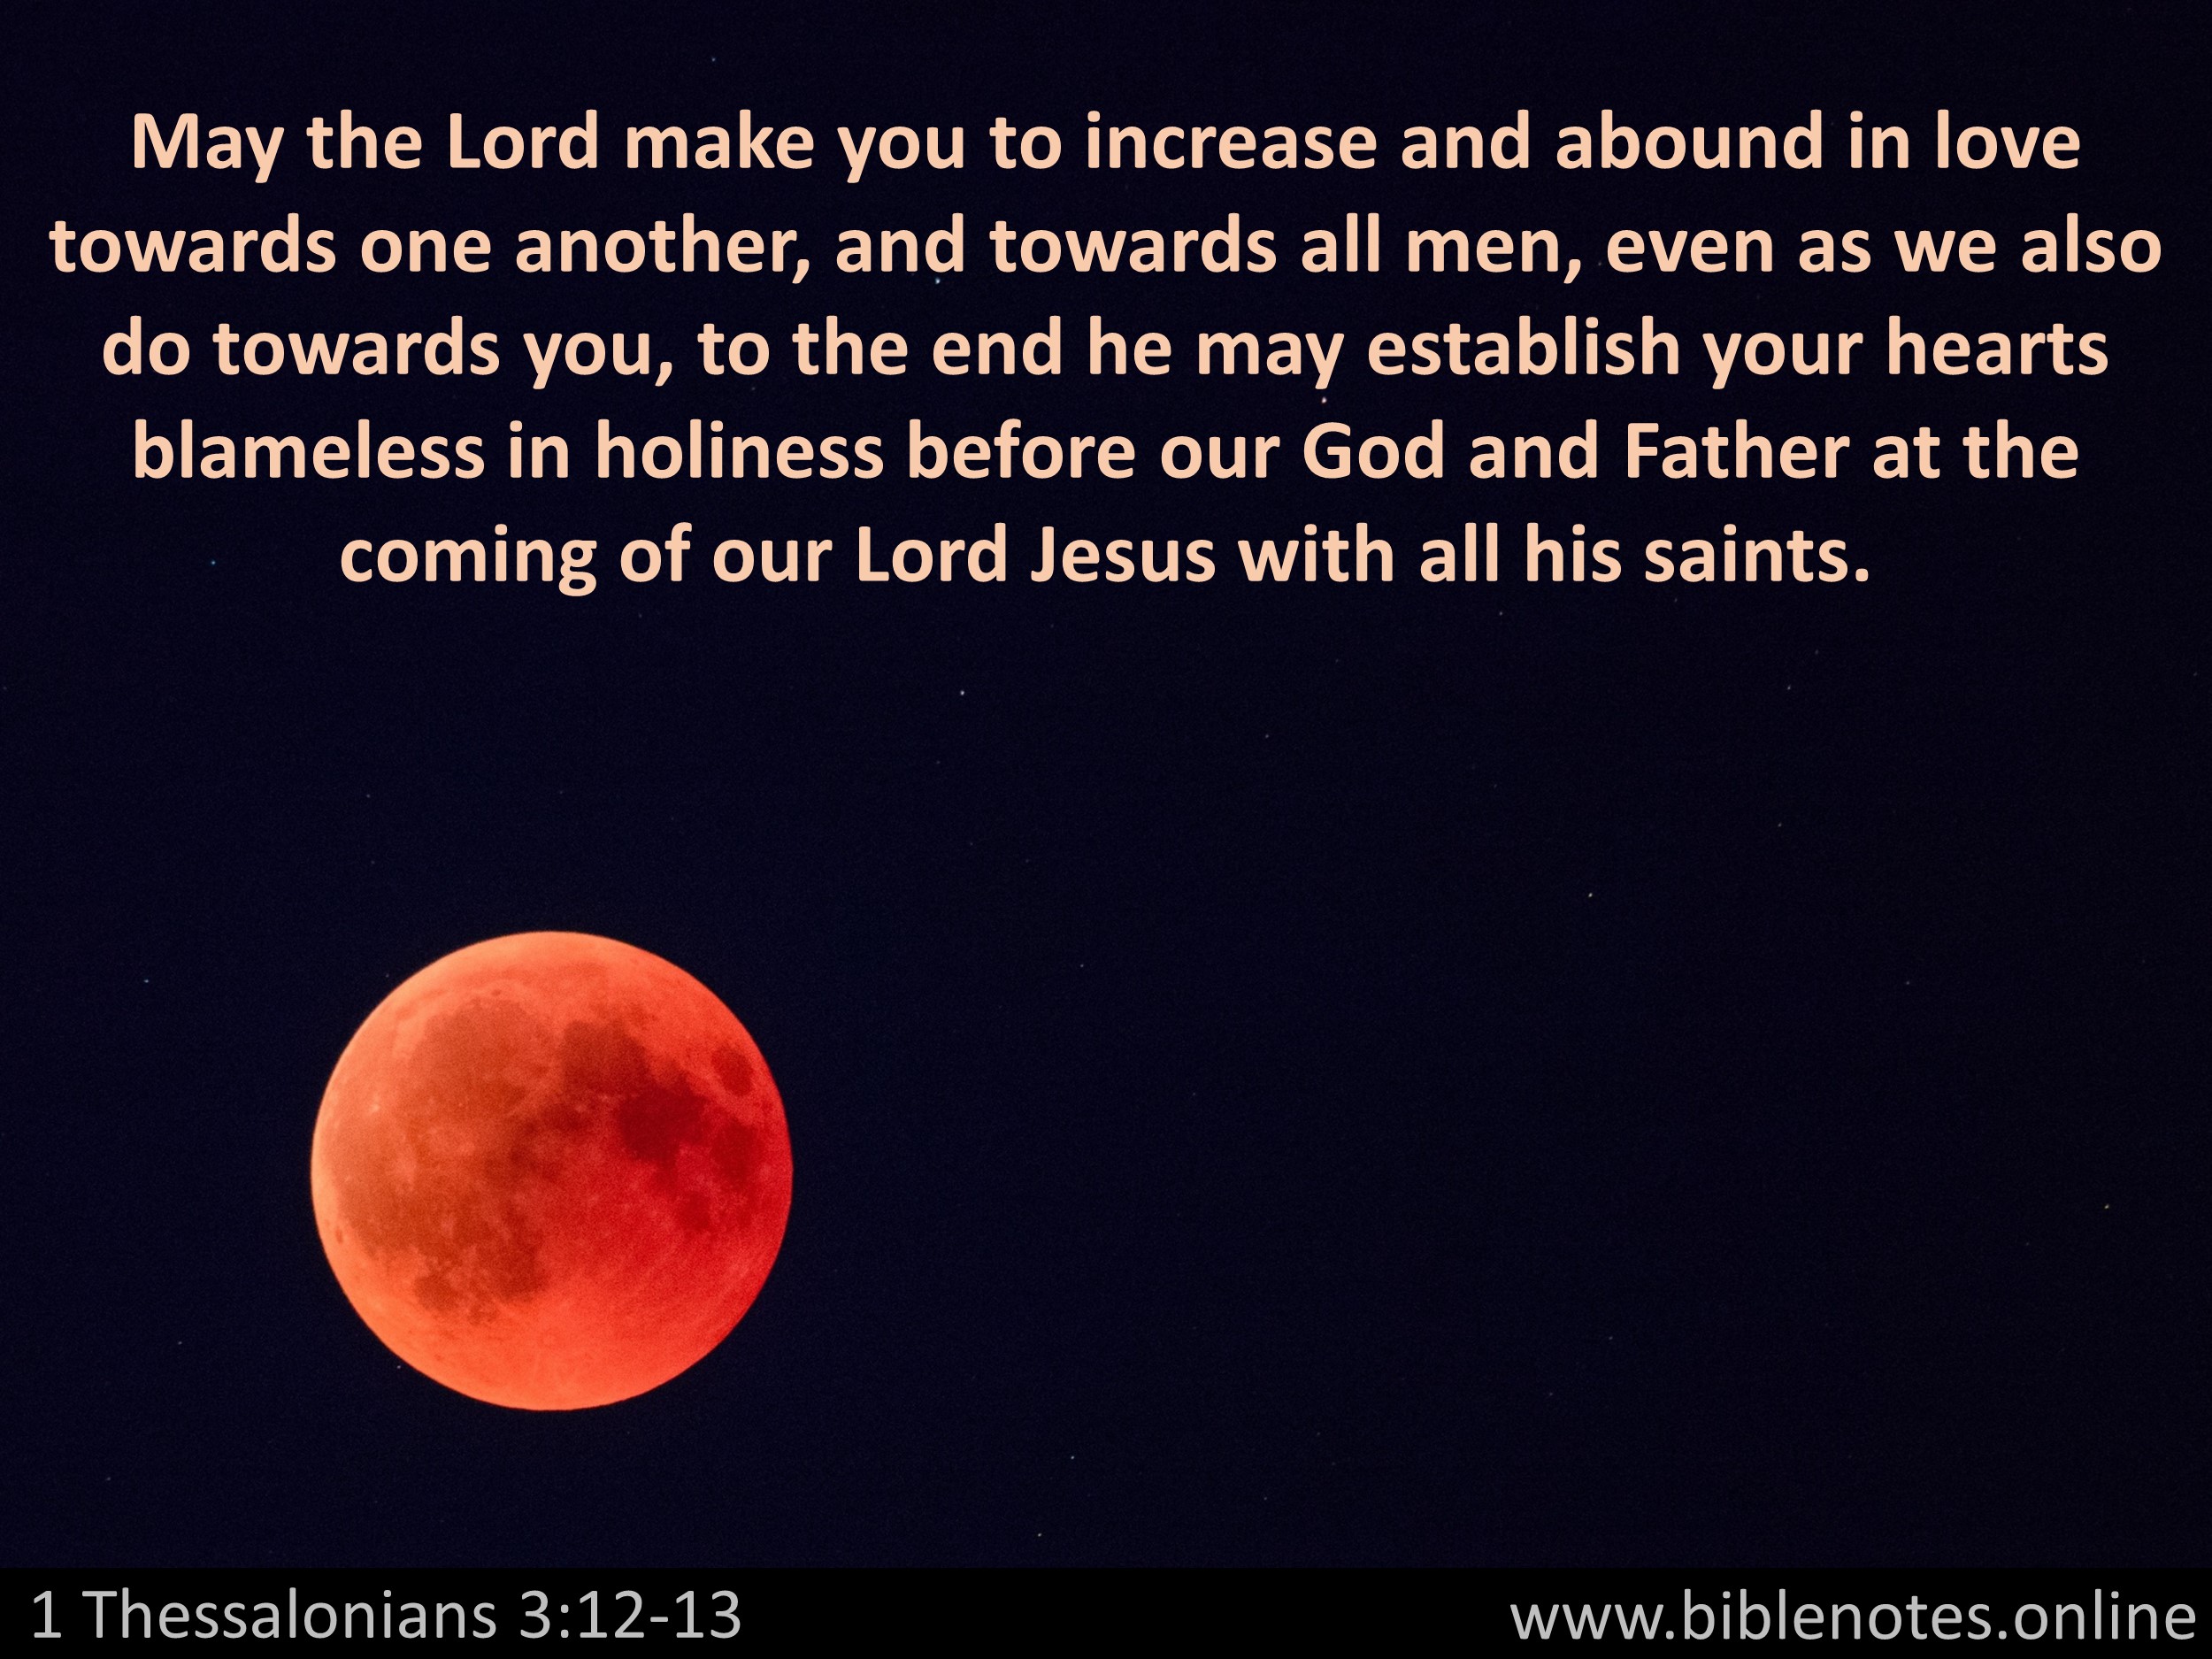 Bible Verse from 1 Thessalonians Chapter 3